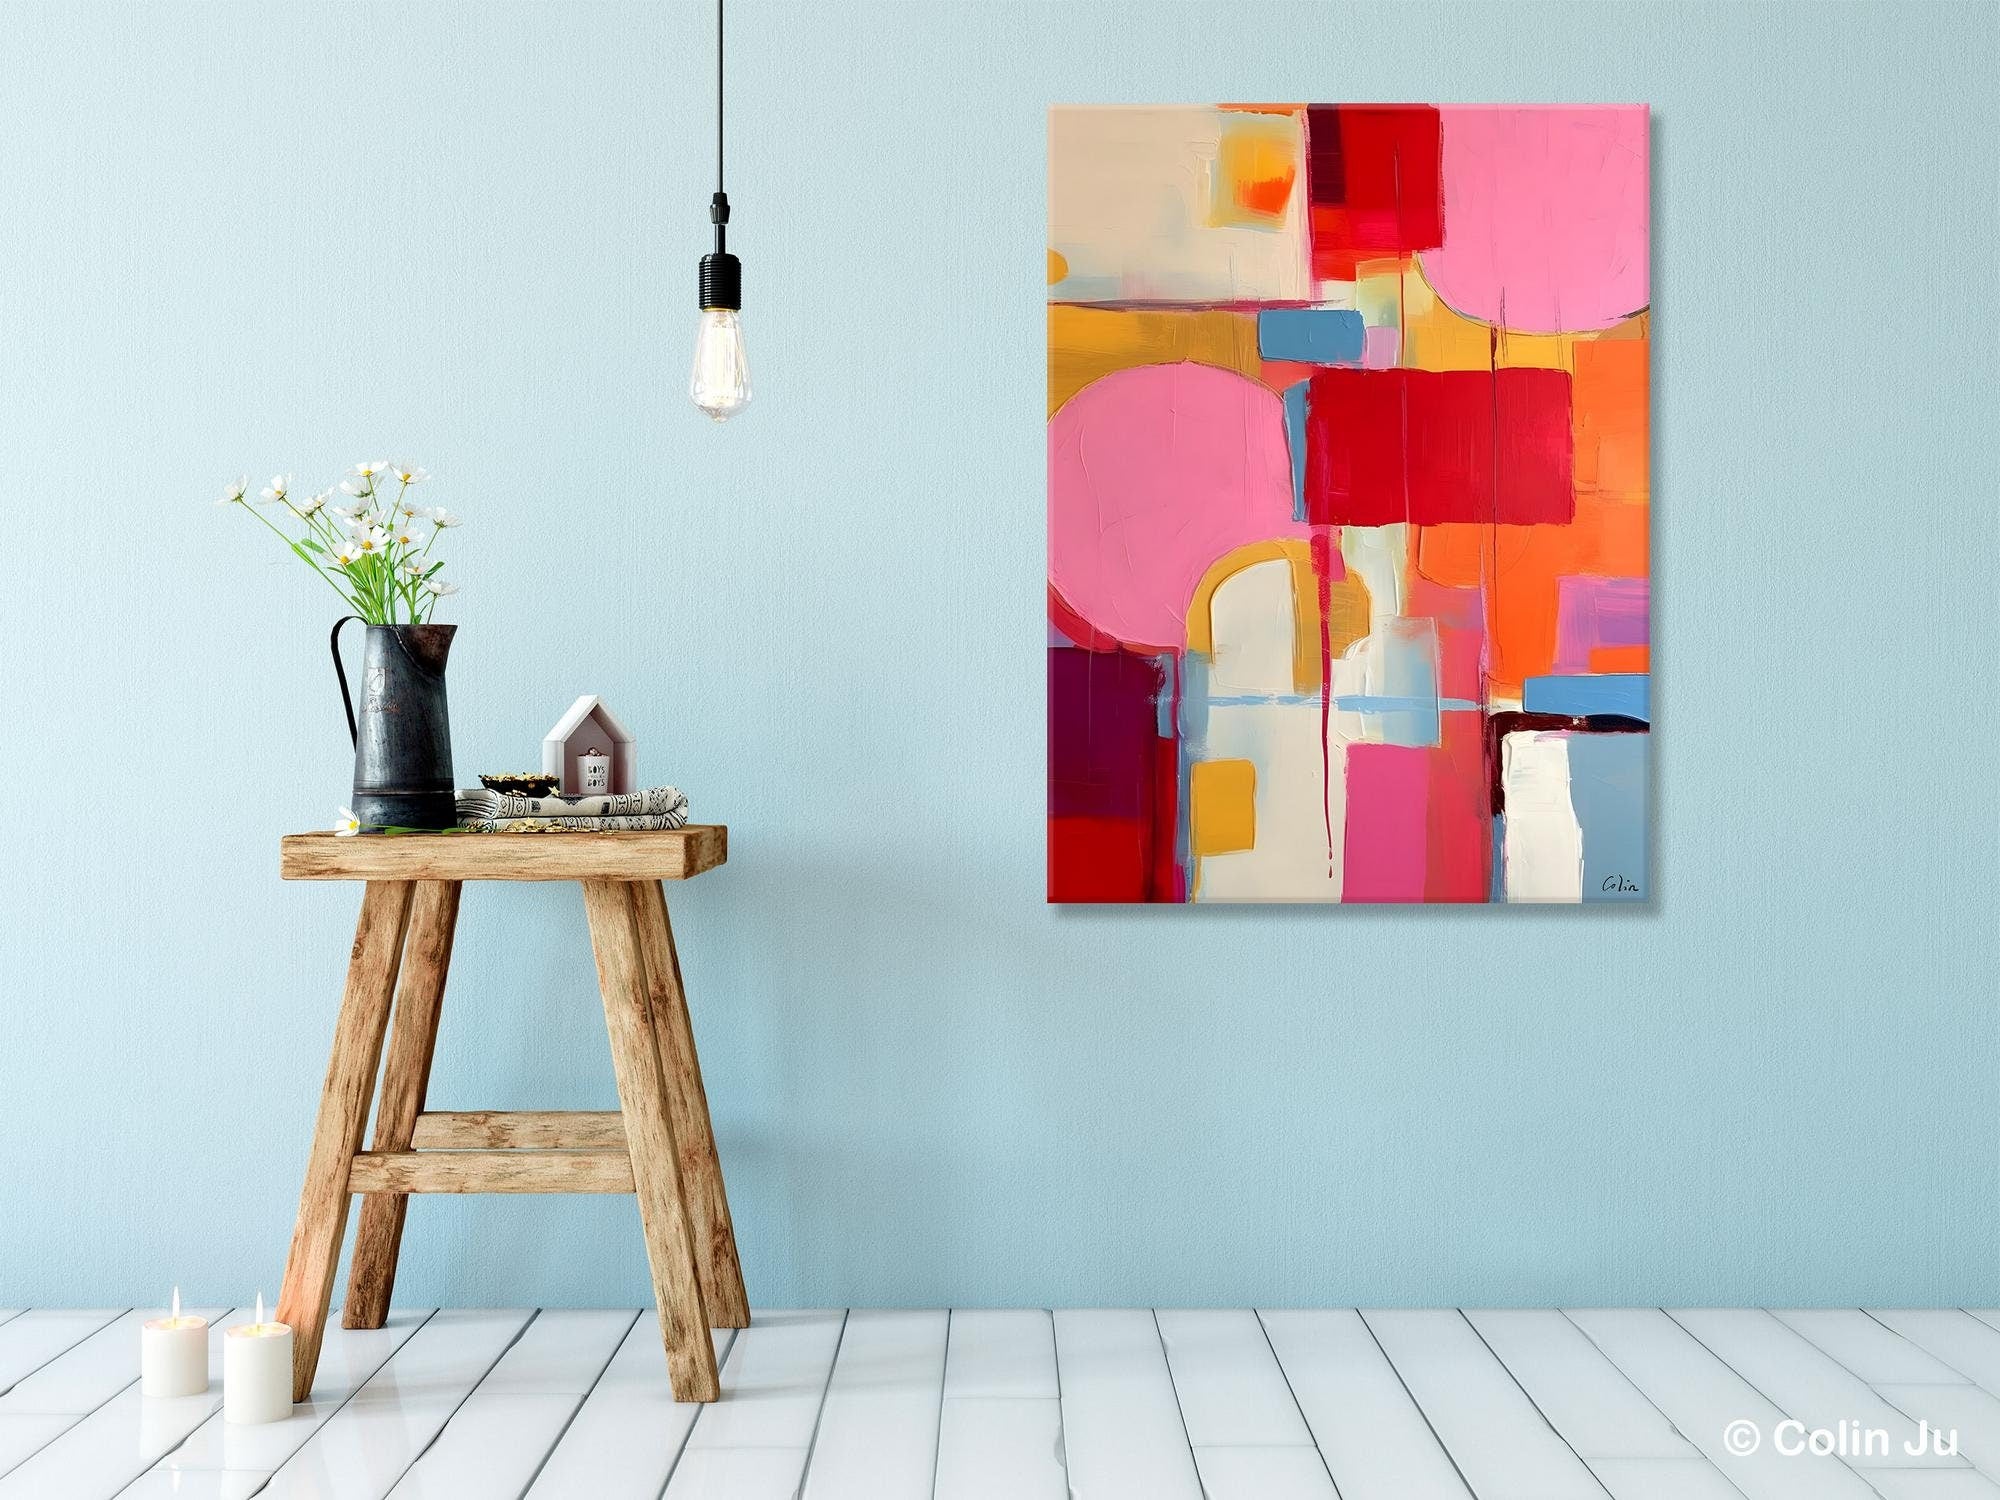 Large Wall Art Painting for Living Room, Large Modern Canvas Wall Paintings, Original Abstract Art, Contemporary Acrylic Painting on Canvas-artworkcanvas